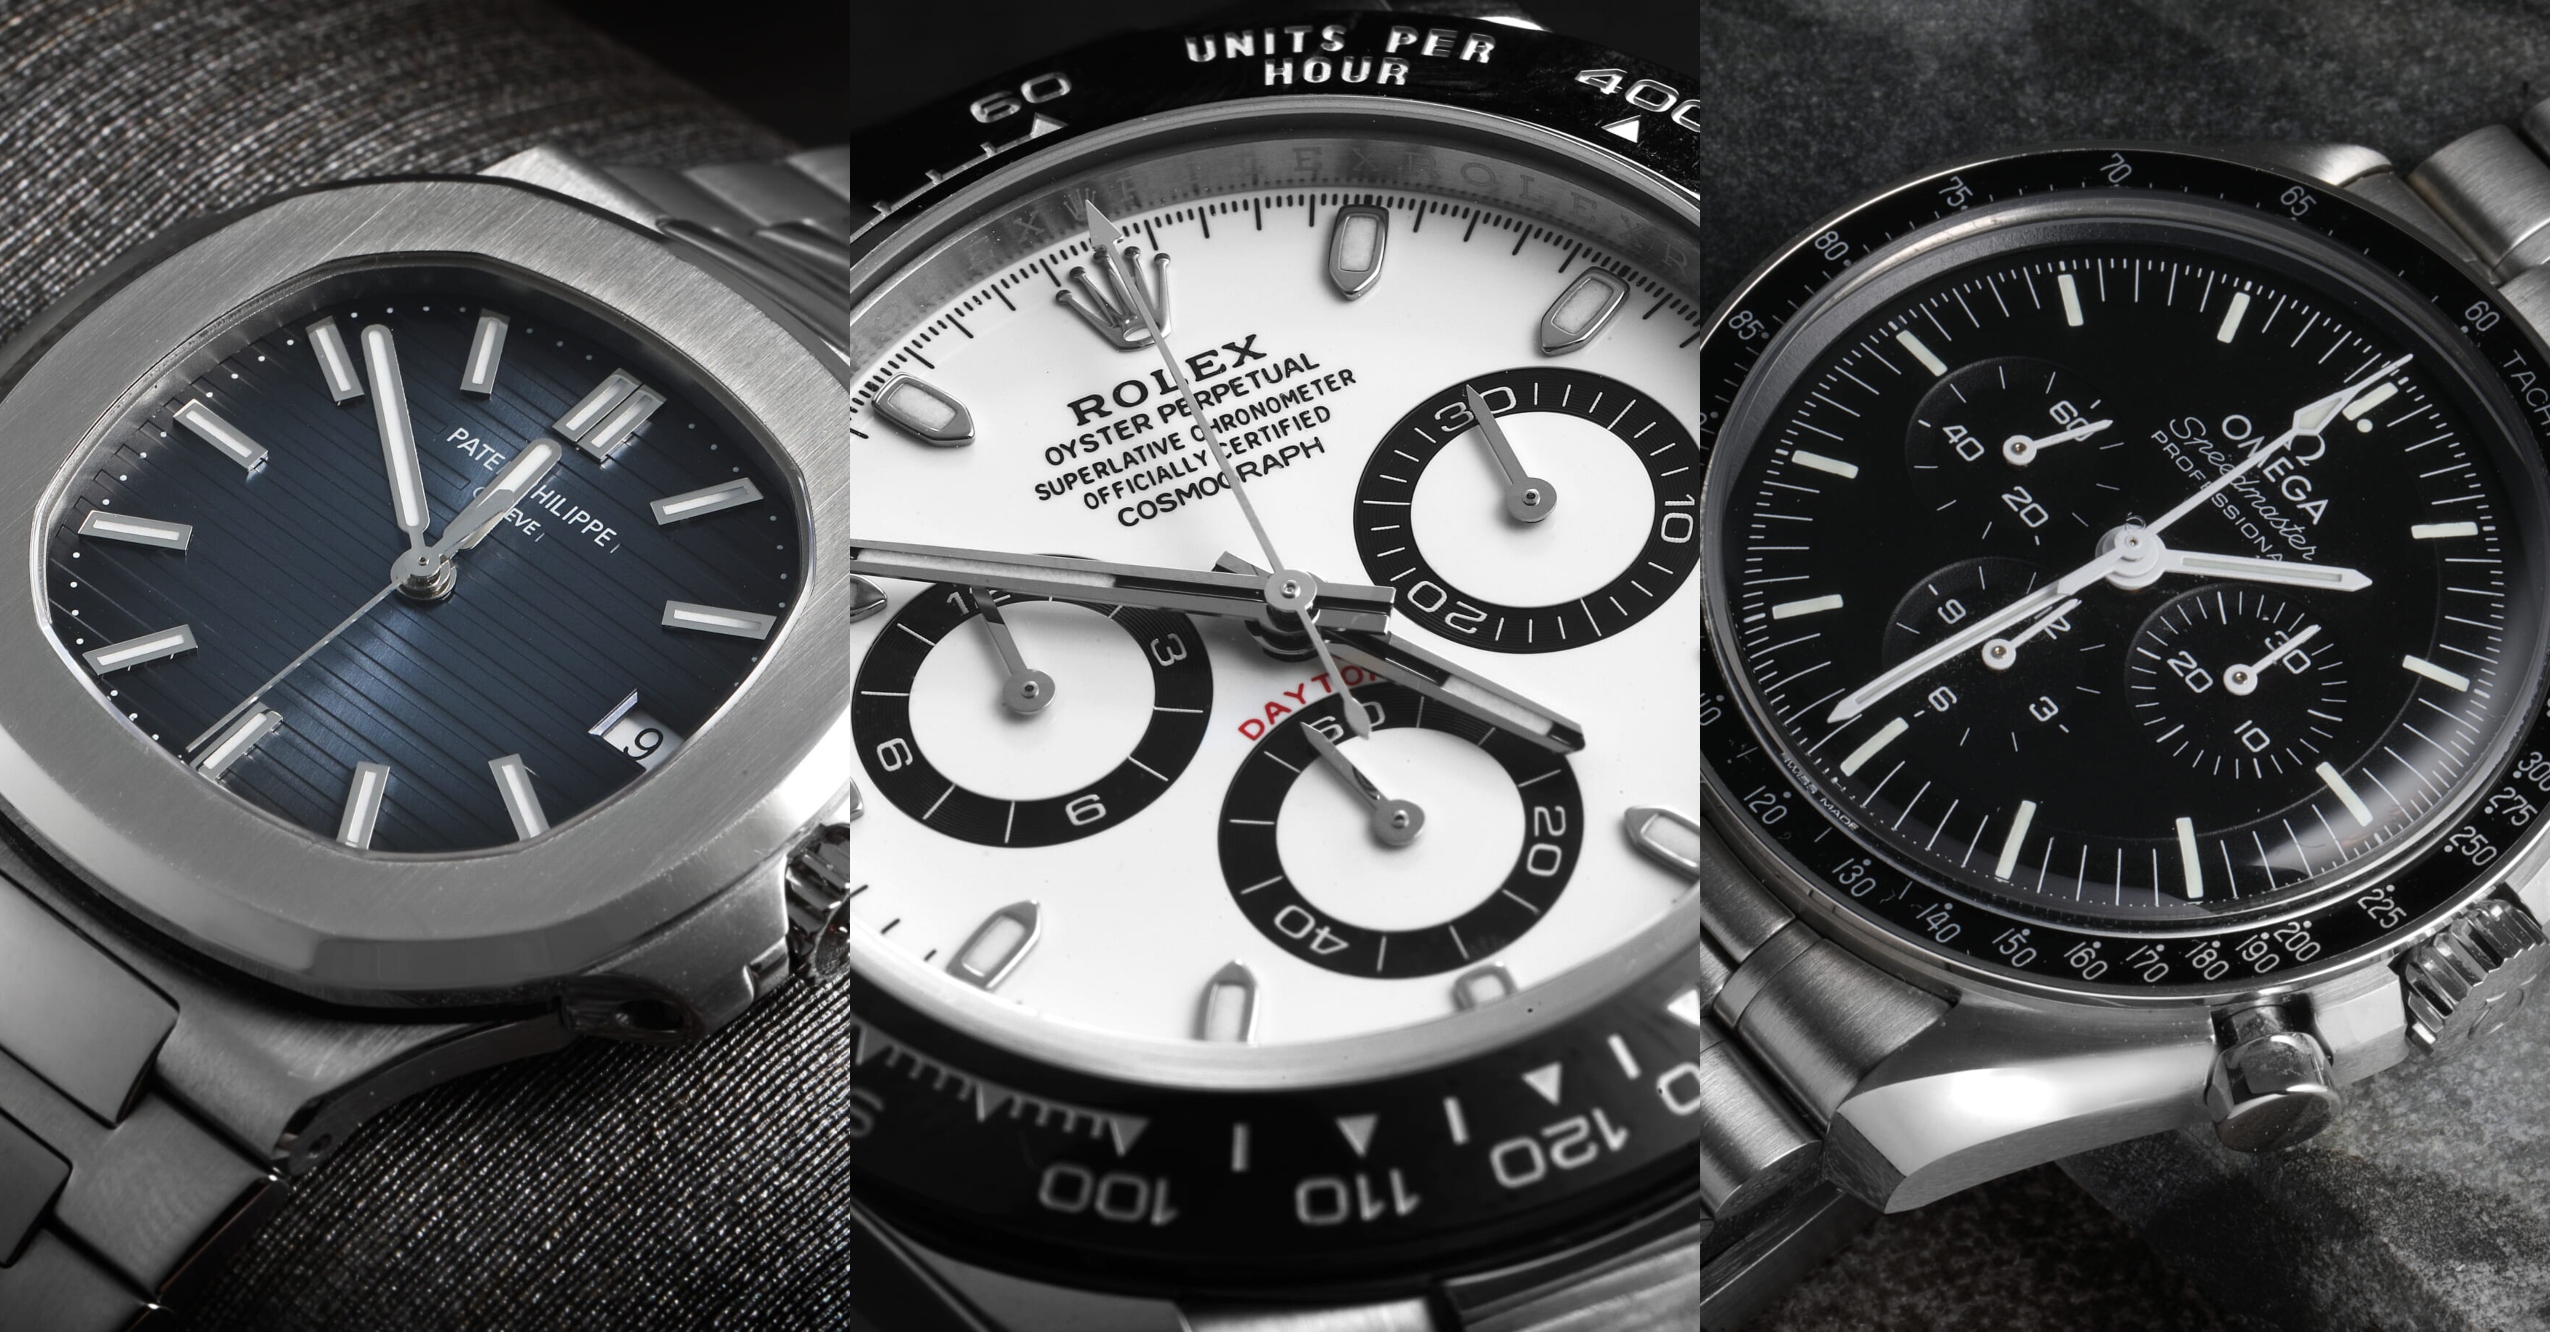 Expertise - World of Time - New and pre-owned exclusive watches with best  conditions. Call us or visit our local shop to get personal consulting.